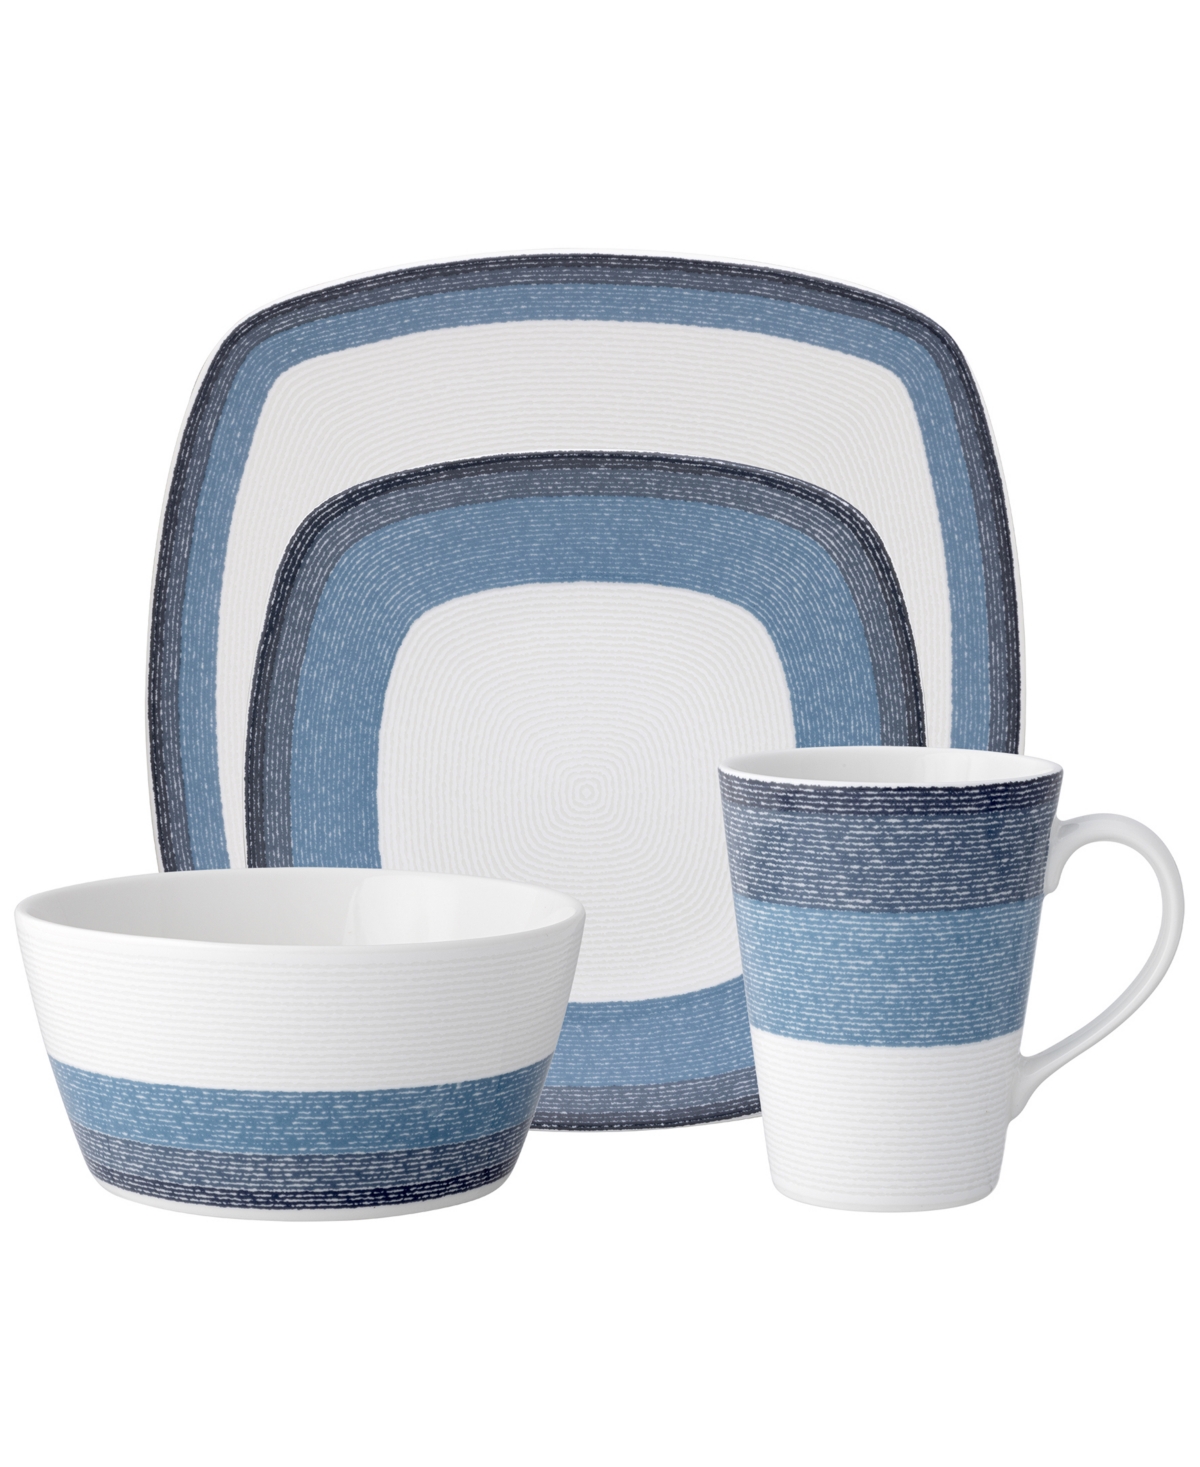 Colorscapes Layers 4 Piece Square Place Setting - Navy